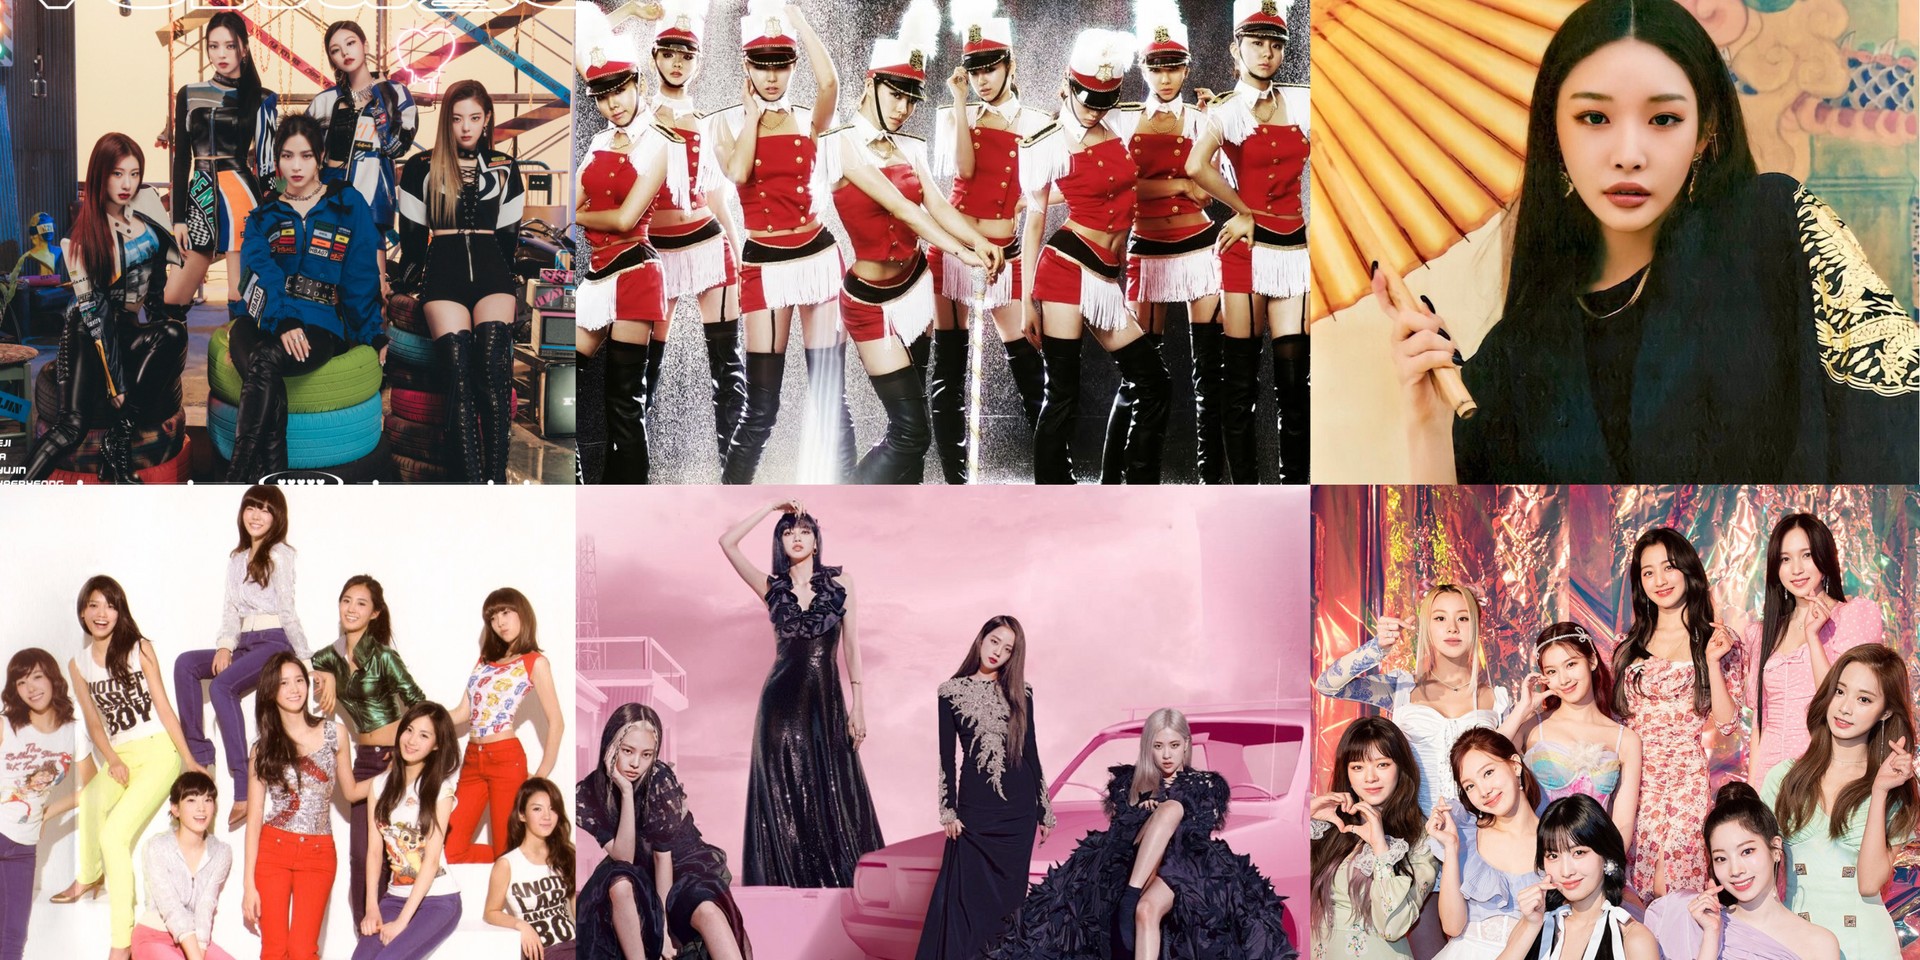 15 iconic K-pop girl group dance moves to remember – Girls' Generation, After School, TWICE, Chung Ha, ITZY, BLACKPINK, and more